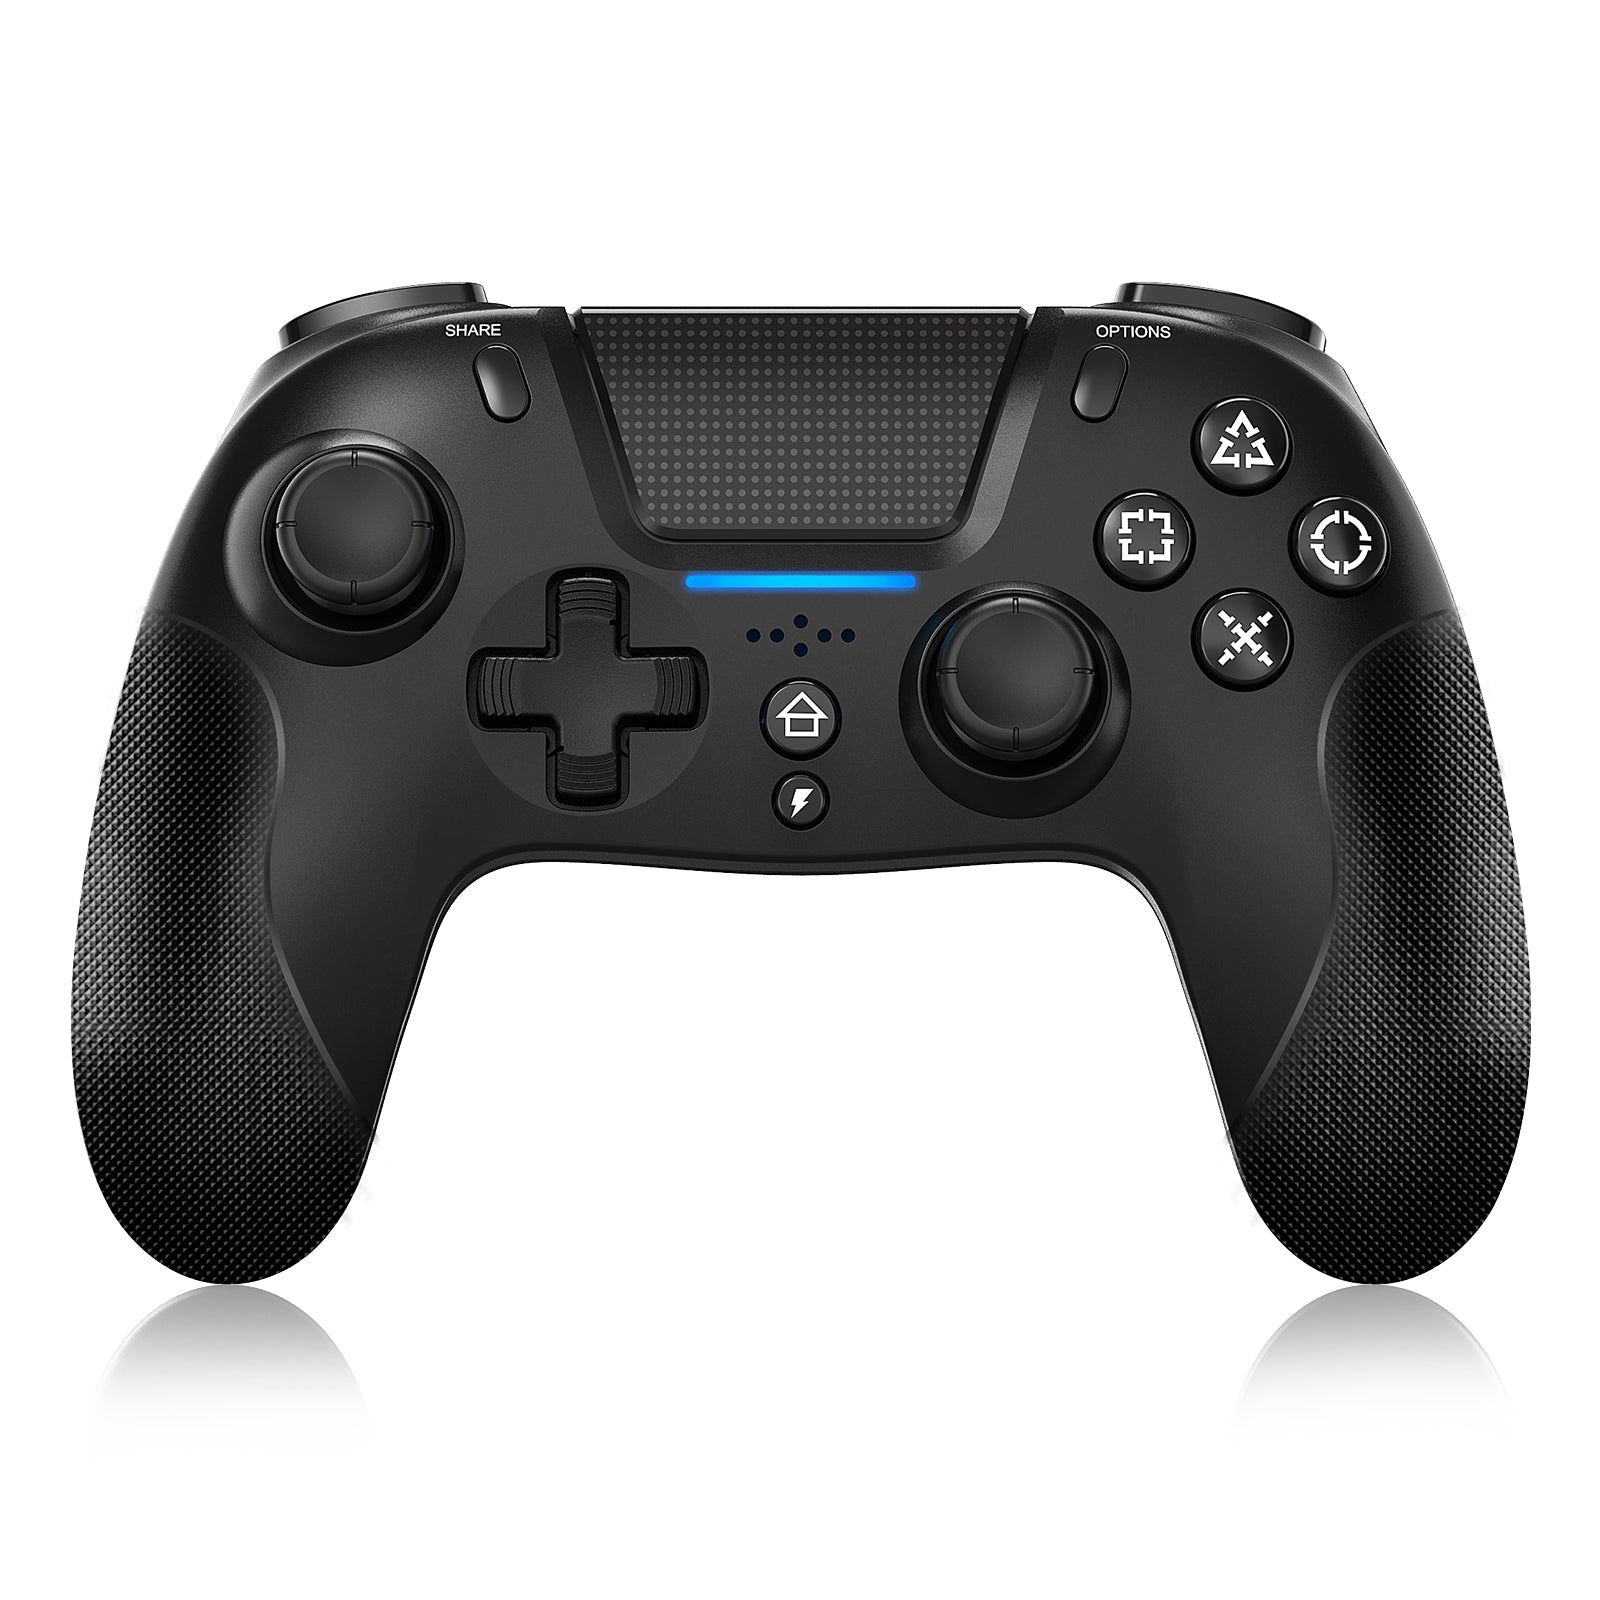 PS4 black controller with anti-slip texture and blue indicator light.